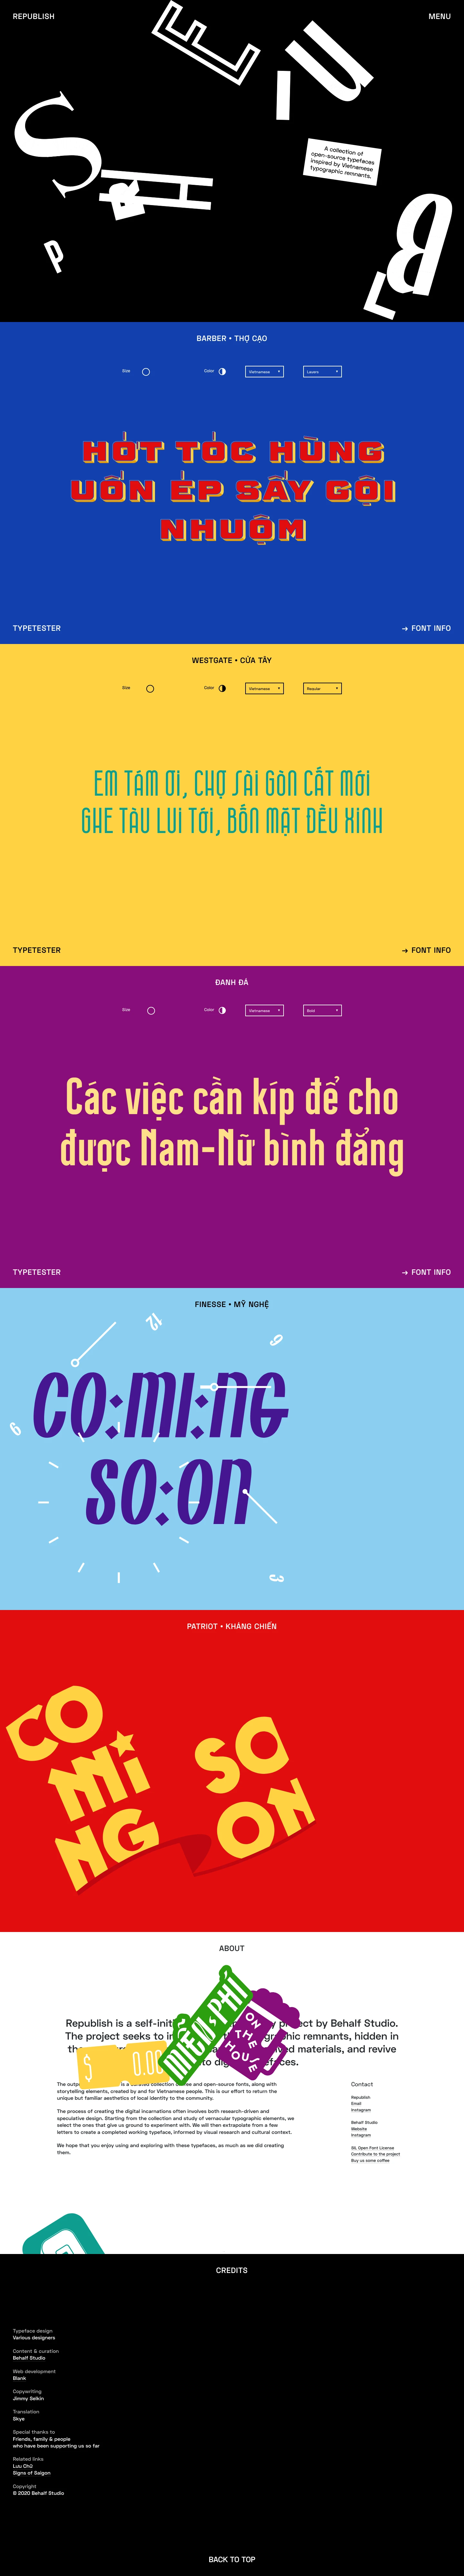 Republish Landing Page Example: Republish is a community project by Behalf Studio that seeks to research Vietnamese typographic remnants and revive them into digital typefaces and fonts.